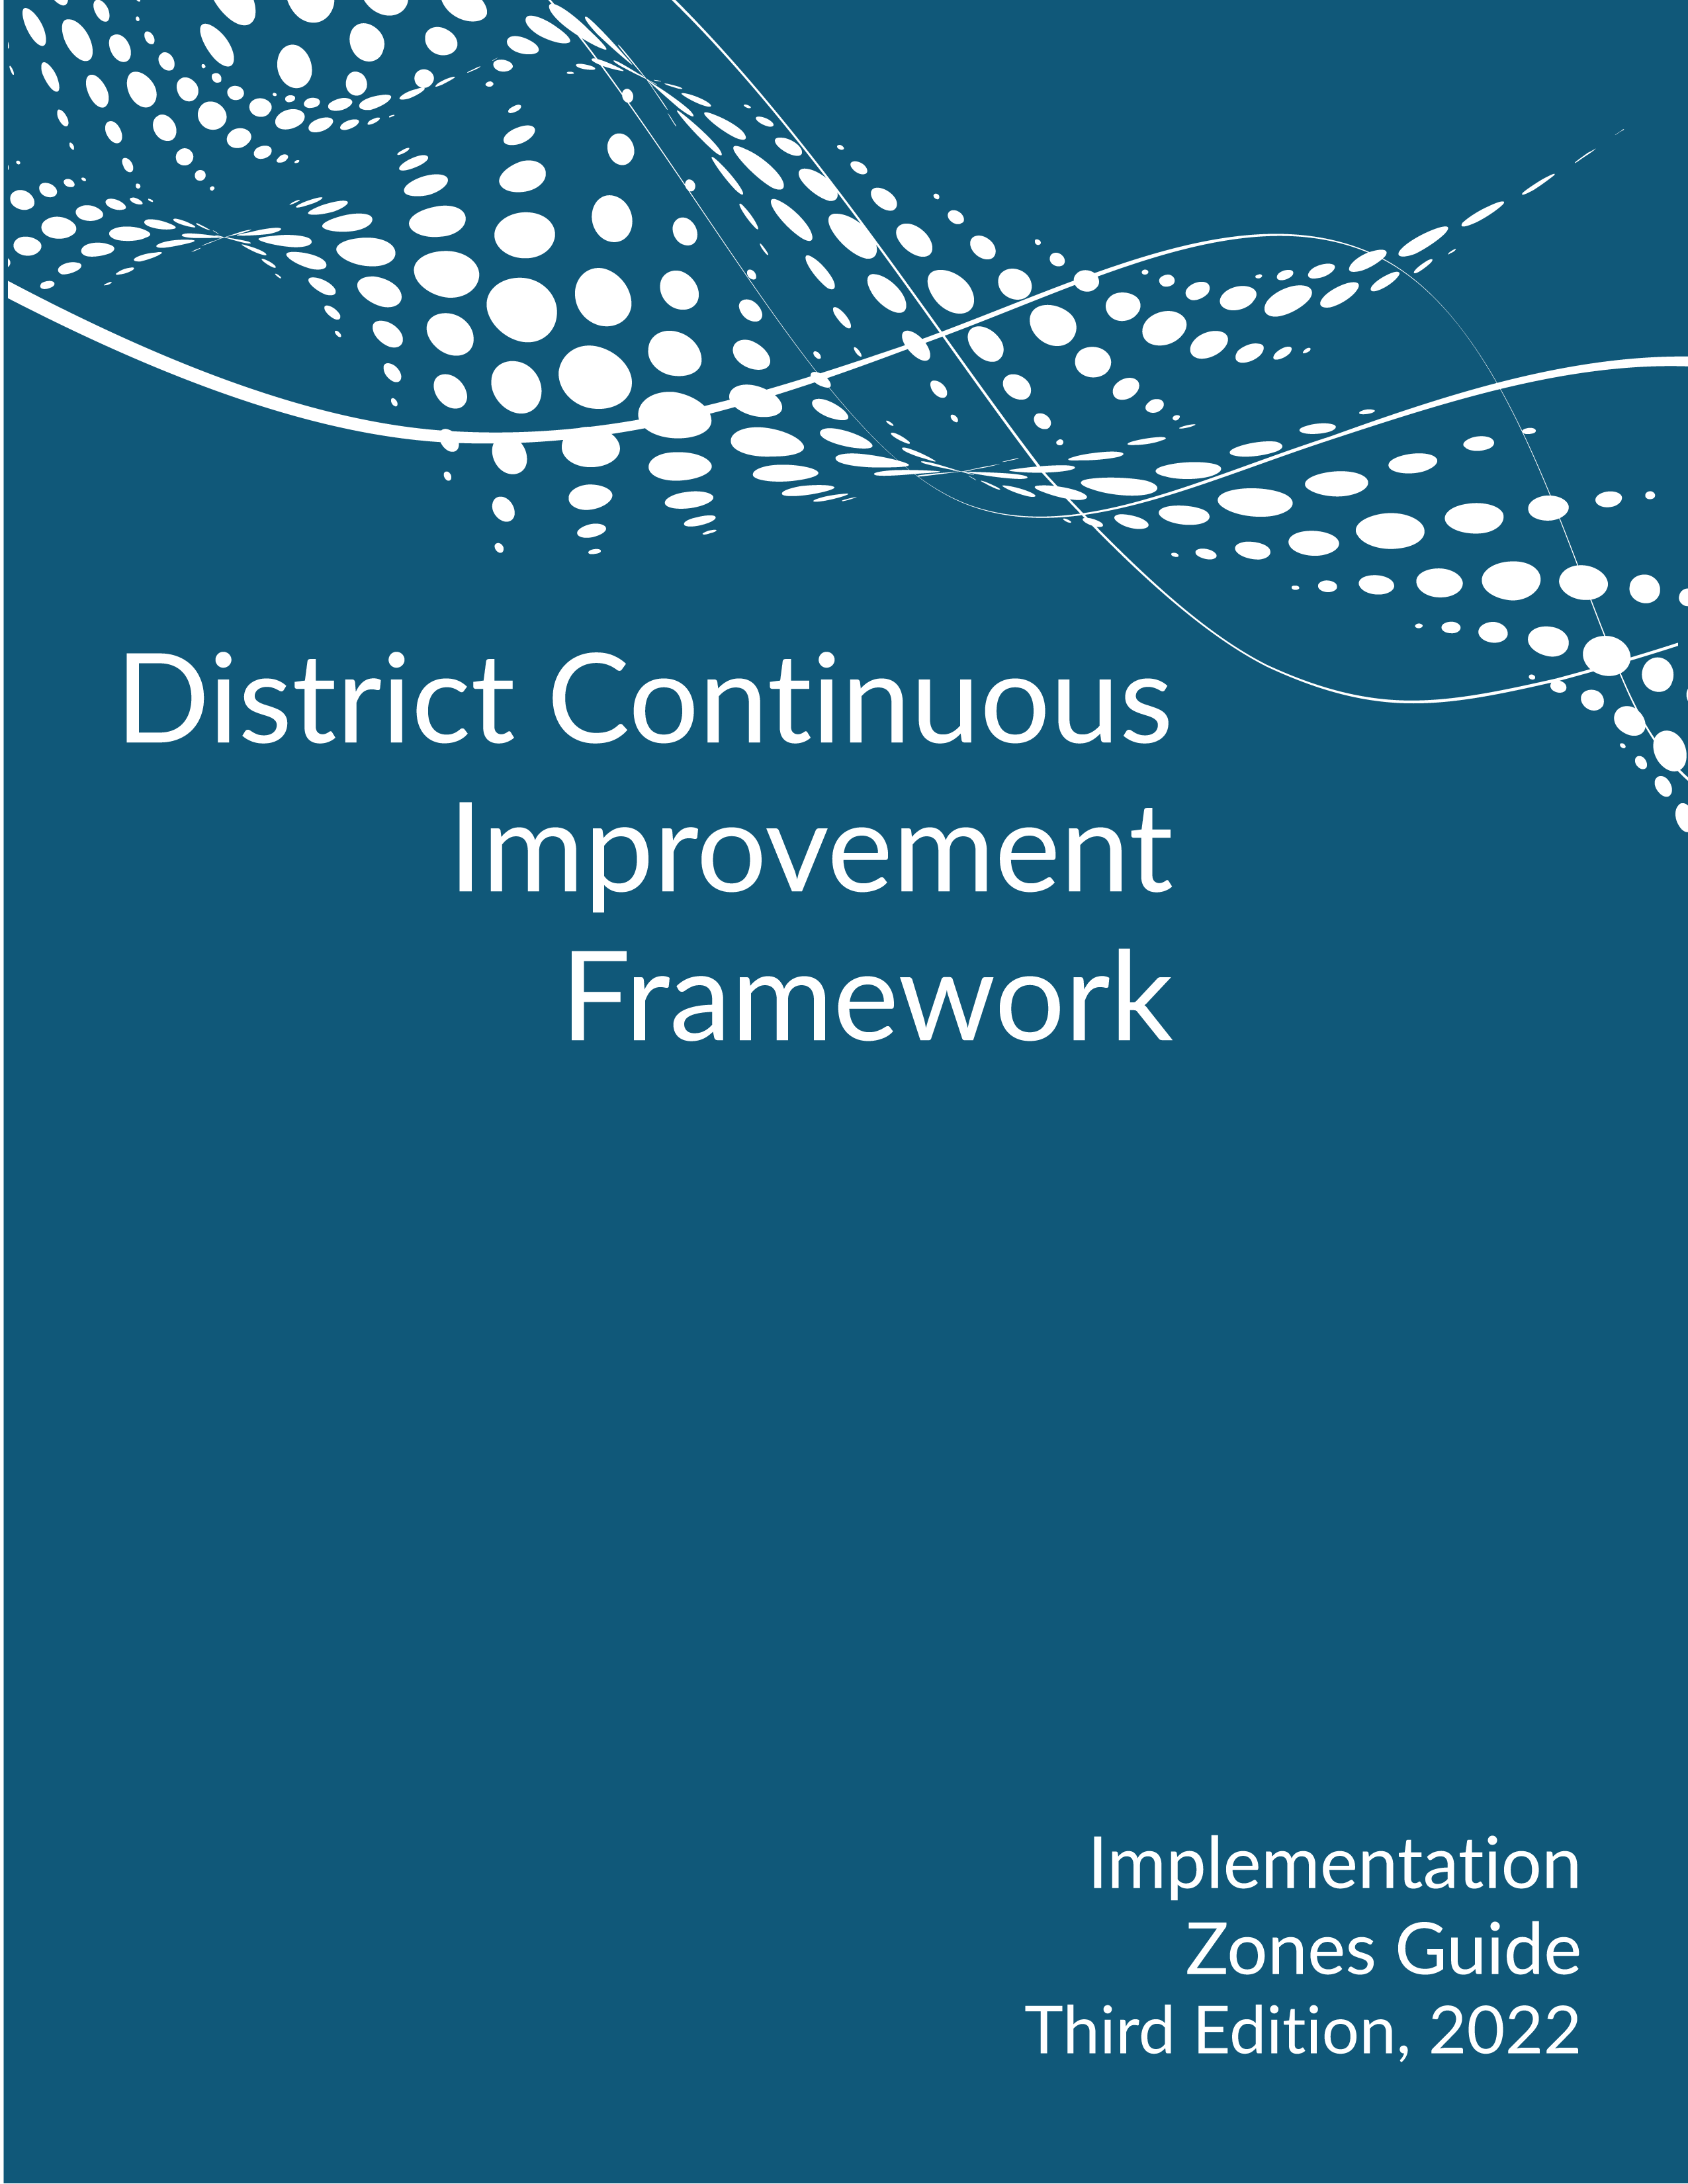 Cover of Implementation Zones Guide